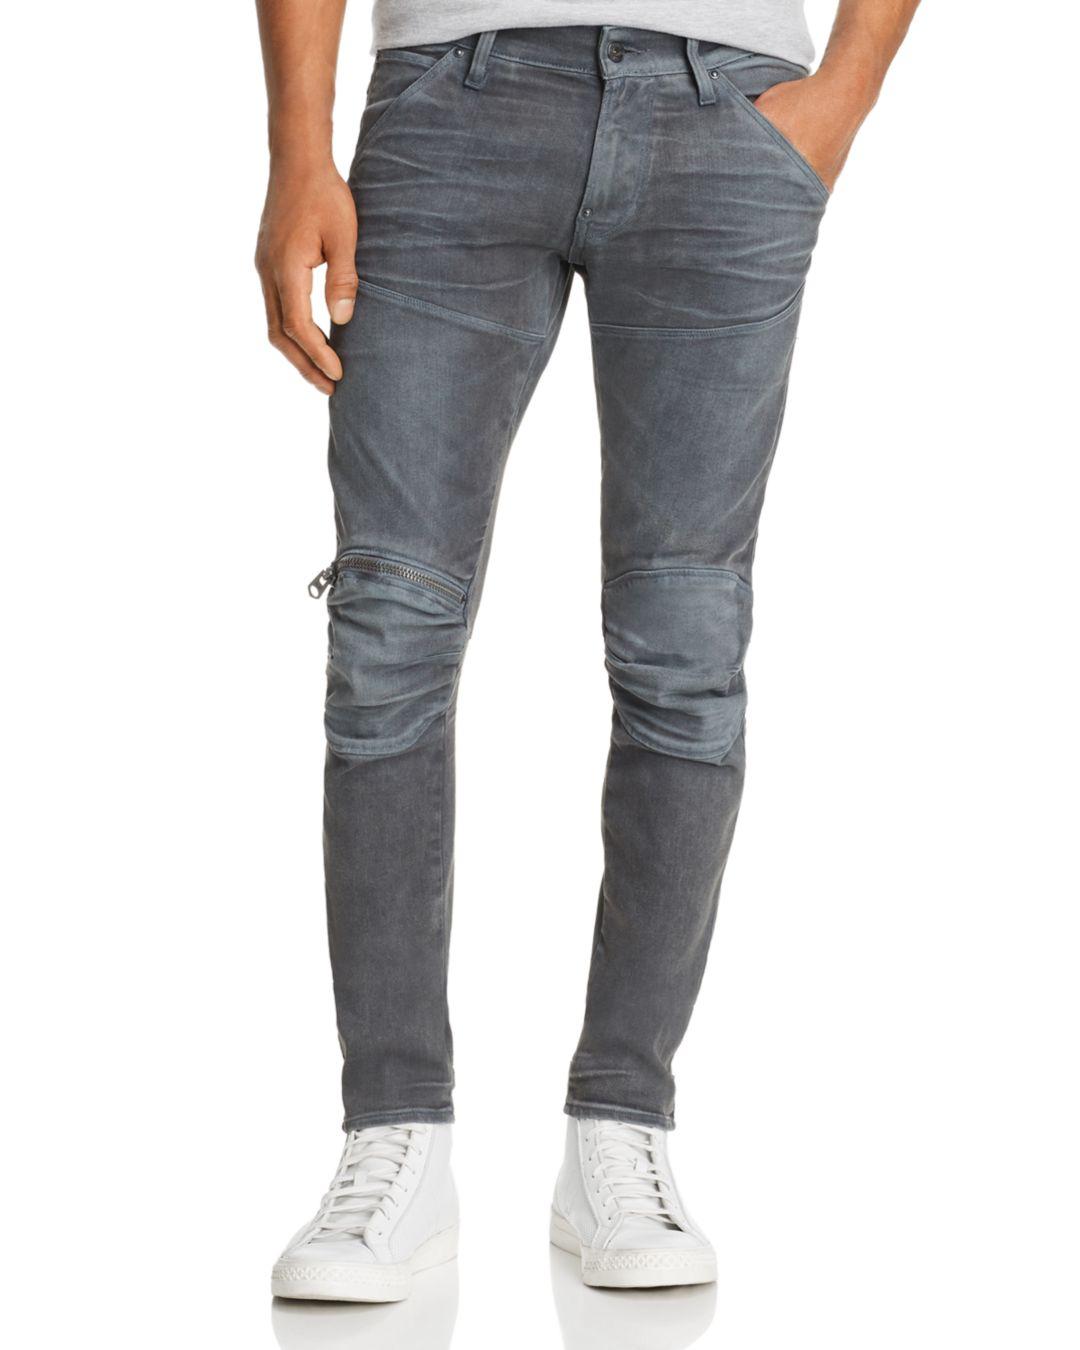 G-Star RAW G - Star Raw 5620 3d Knee - Zip Skinny Jeans In Dark Aged Cobler  in Blue for Men | Lyst Canada